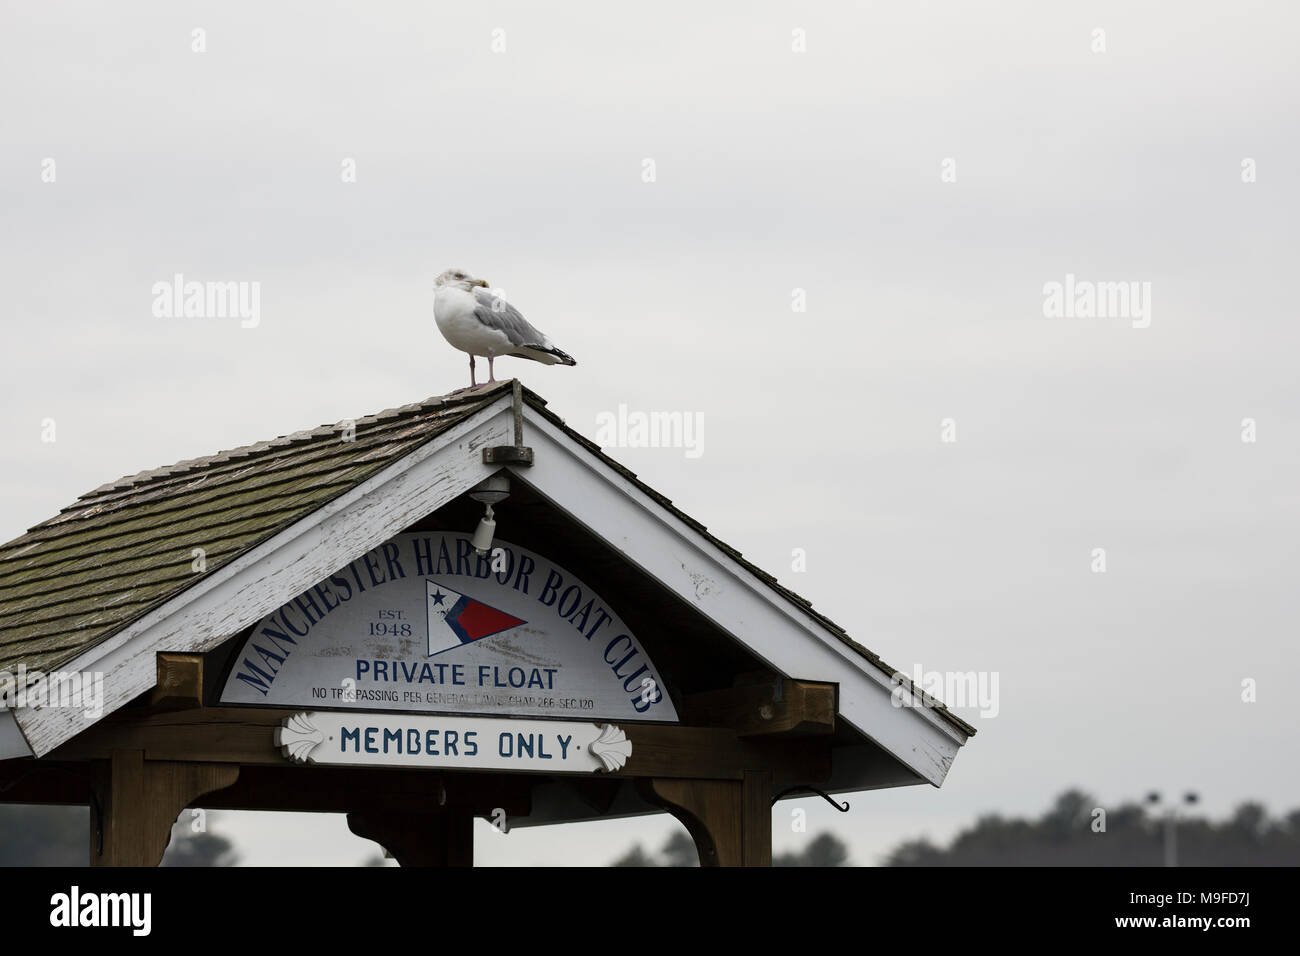 A herring gull sits on the Manchester Harbor Boat Club dock for Members Only in Manchester-by-the-Sea, Massachusetts, in winter. Stock Photo